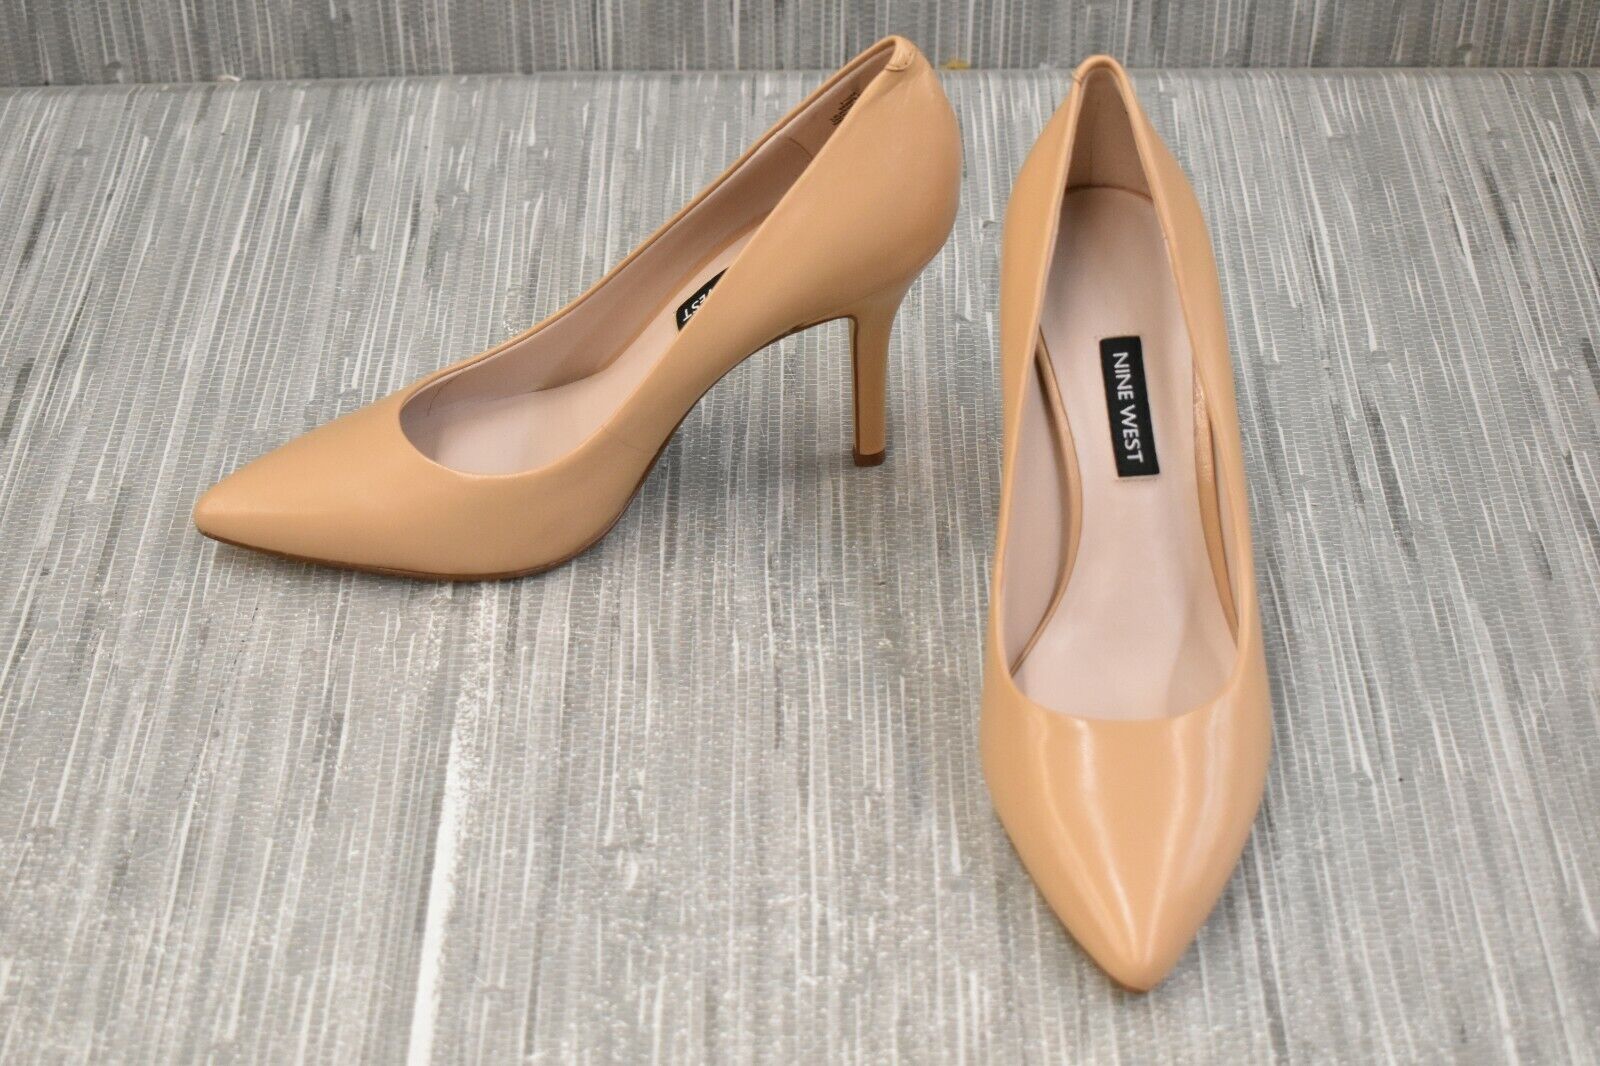 Nine West Flax Pointed Toe Leather Pumps, Women’s Size 7.5M, Light Natural NEW | TellGrade